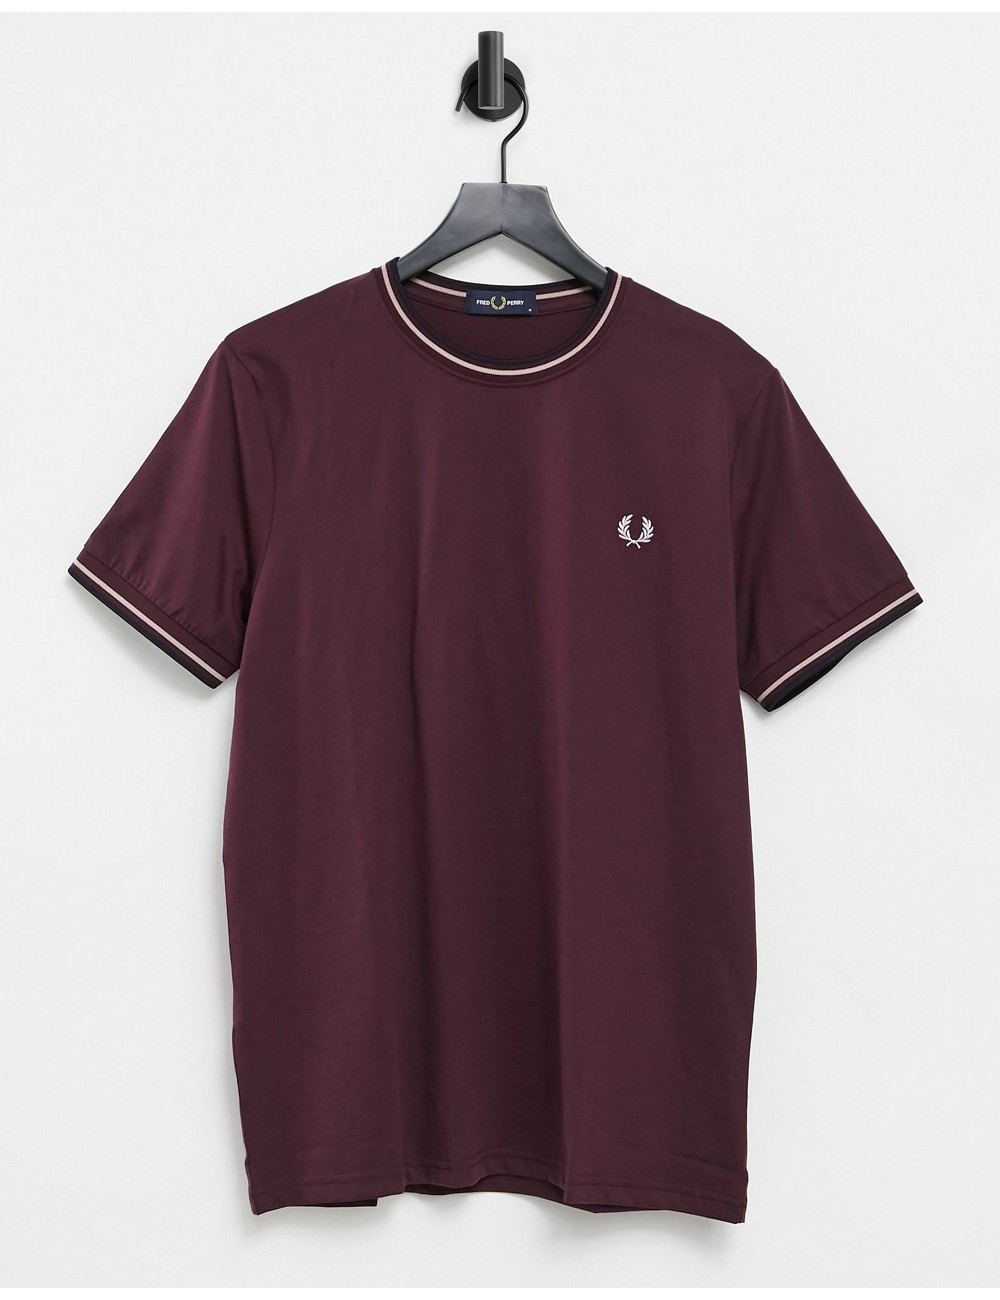 Fred Perry twin tipped...